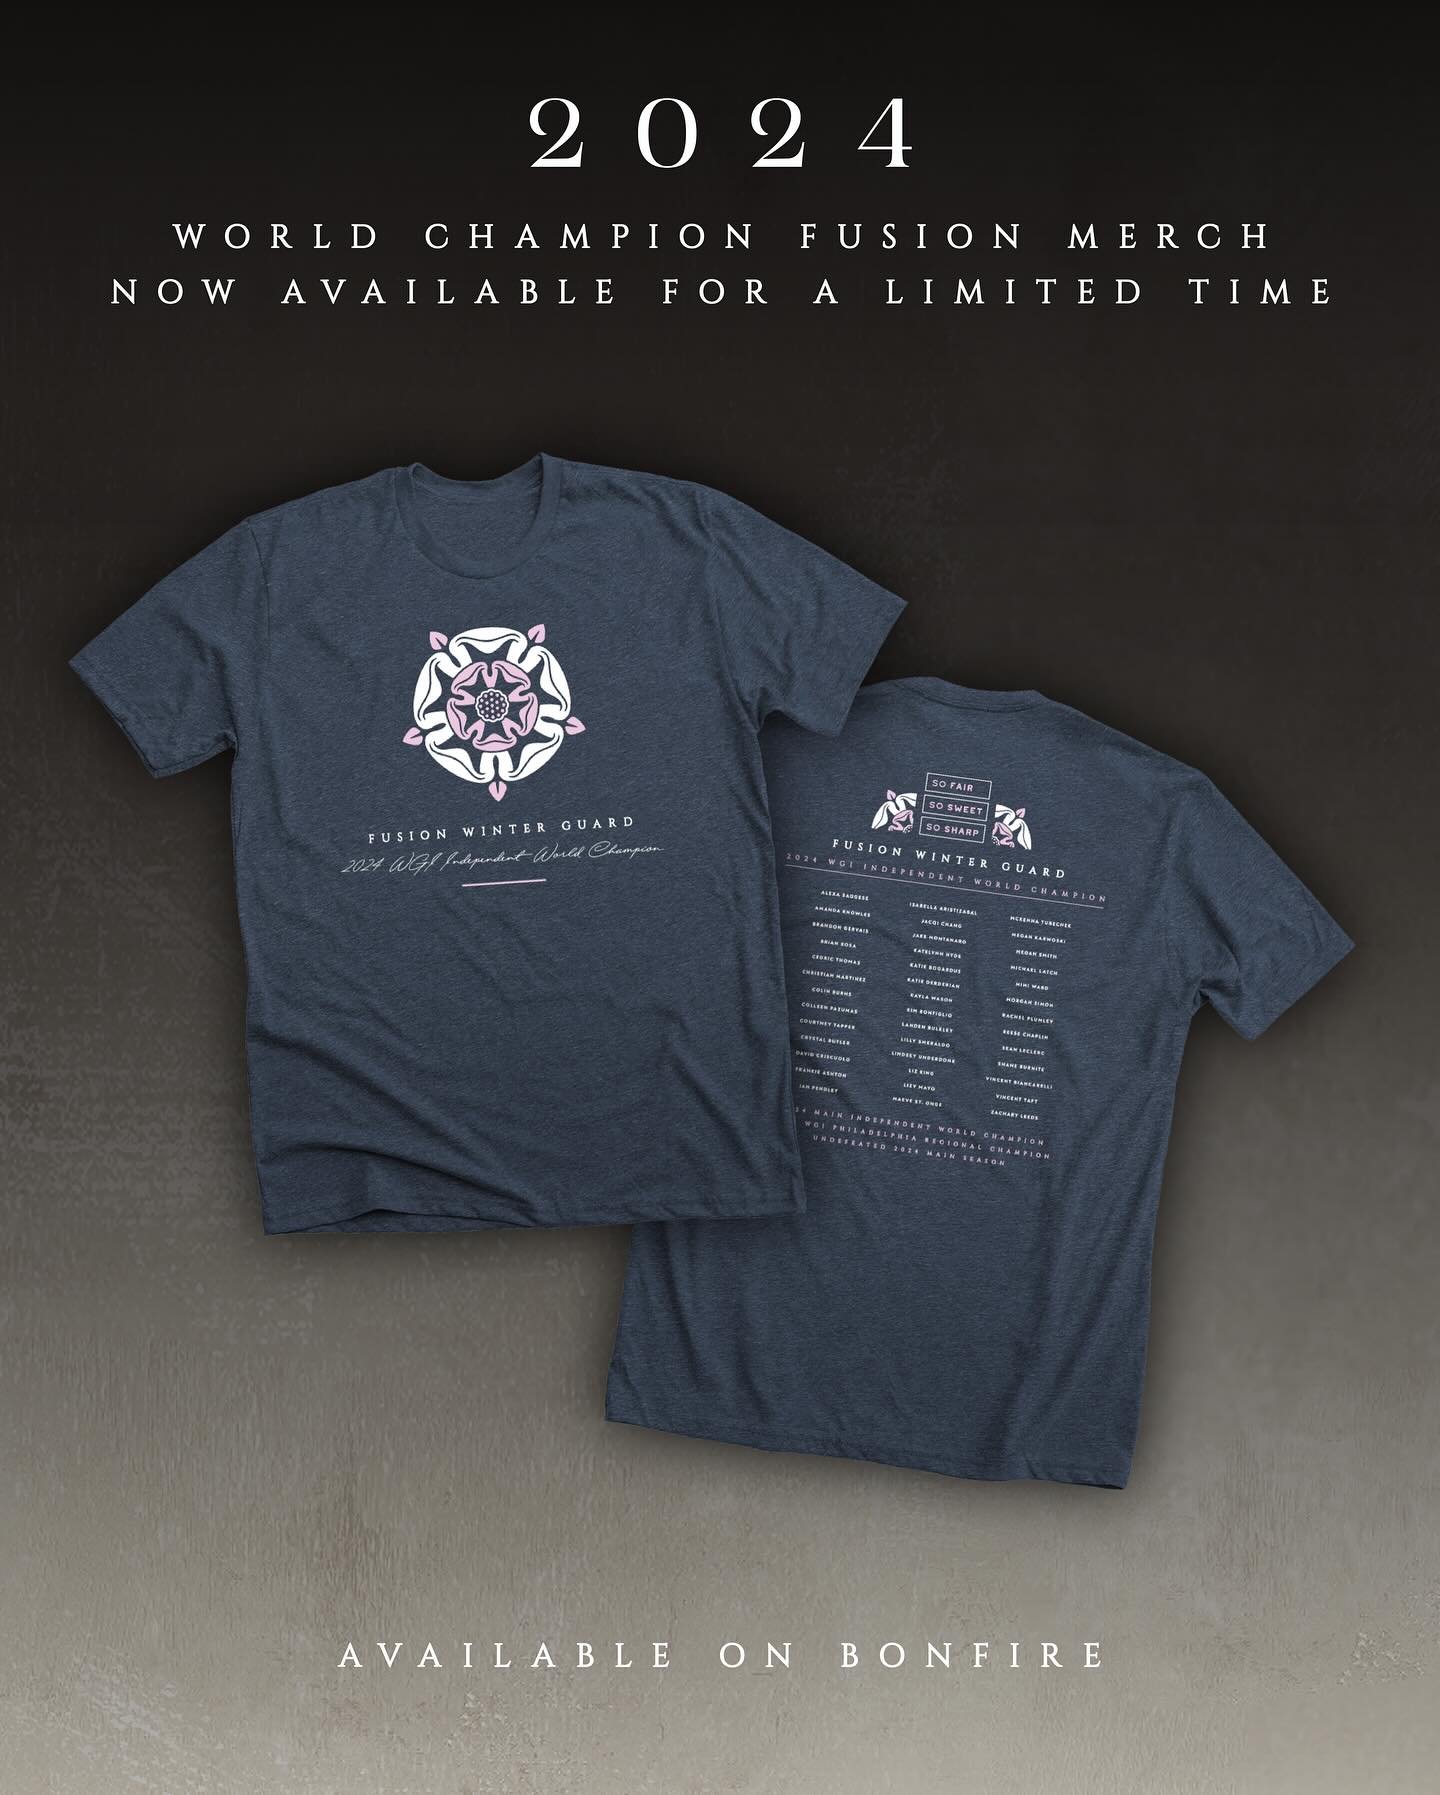 Our new, LIMITED EDITION World Champion merch is now available in a handful of styles! We appreciate your support always!
🟪
#WGI #wgi2024 #MAIN #MidAtlanticIndoorNetwork #MAINGuards #newjersey #eastcoast #independentworld #colorguard #winterguard #d